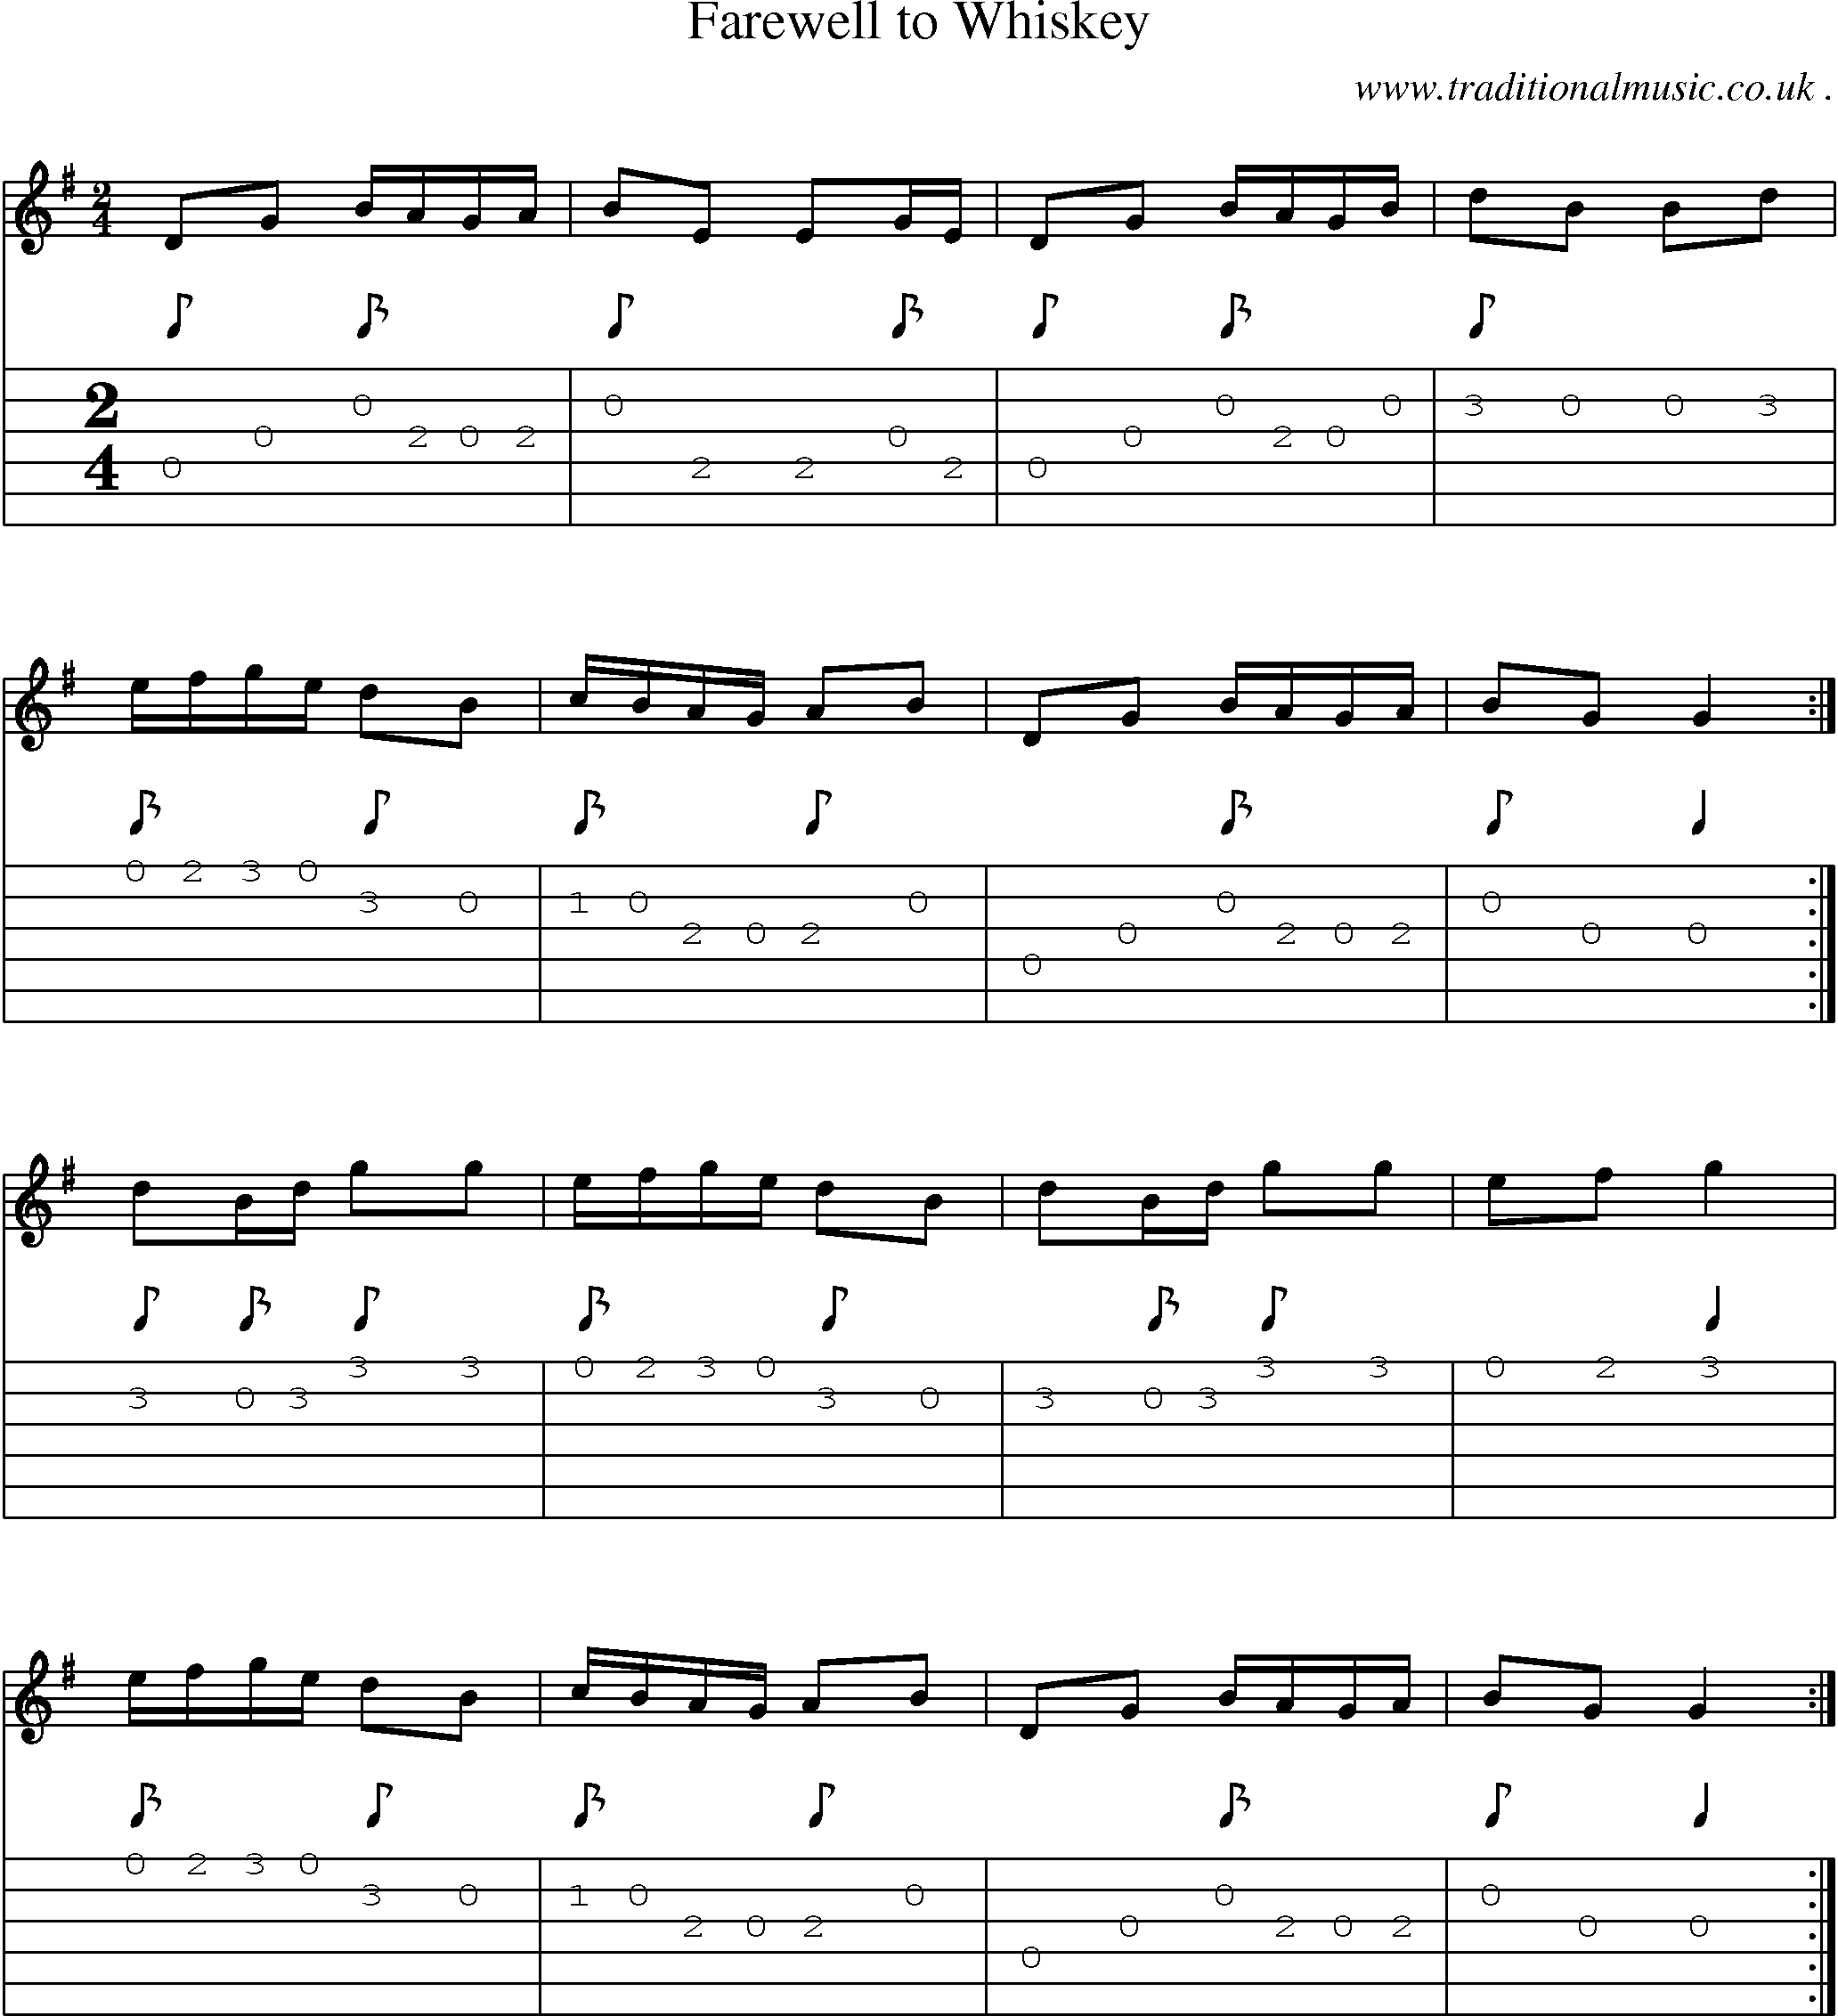 Sheet-Music and Guitar Tabs for Farewell To Whiskey